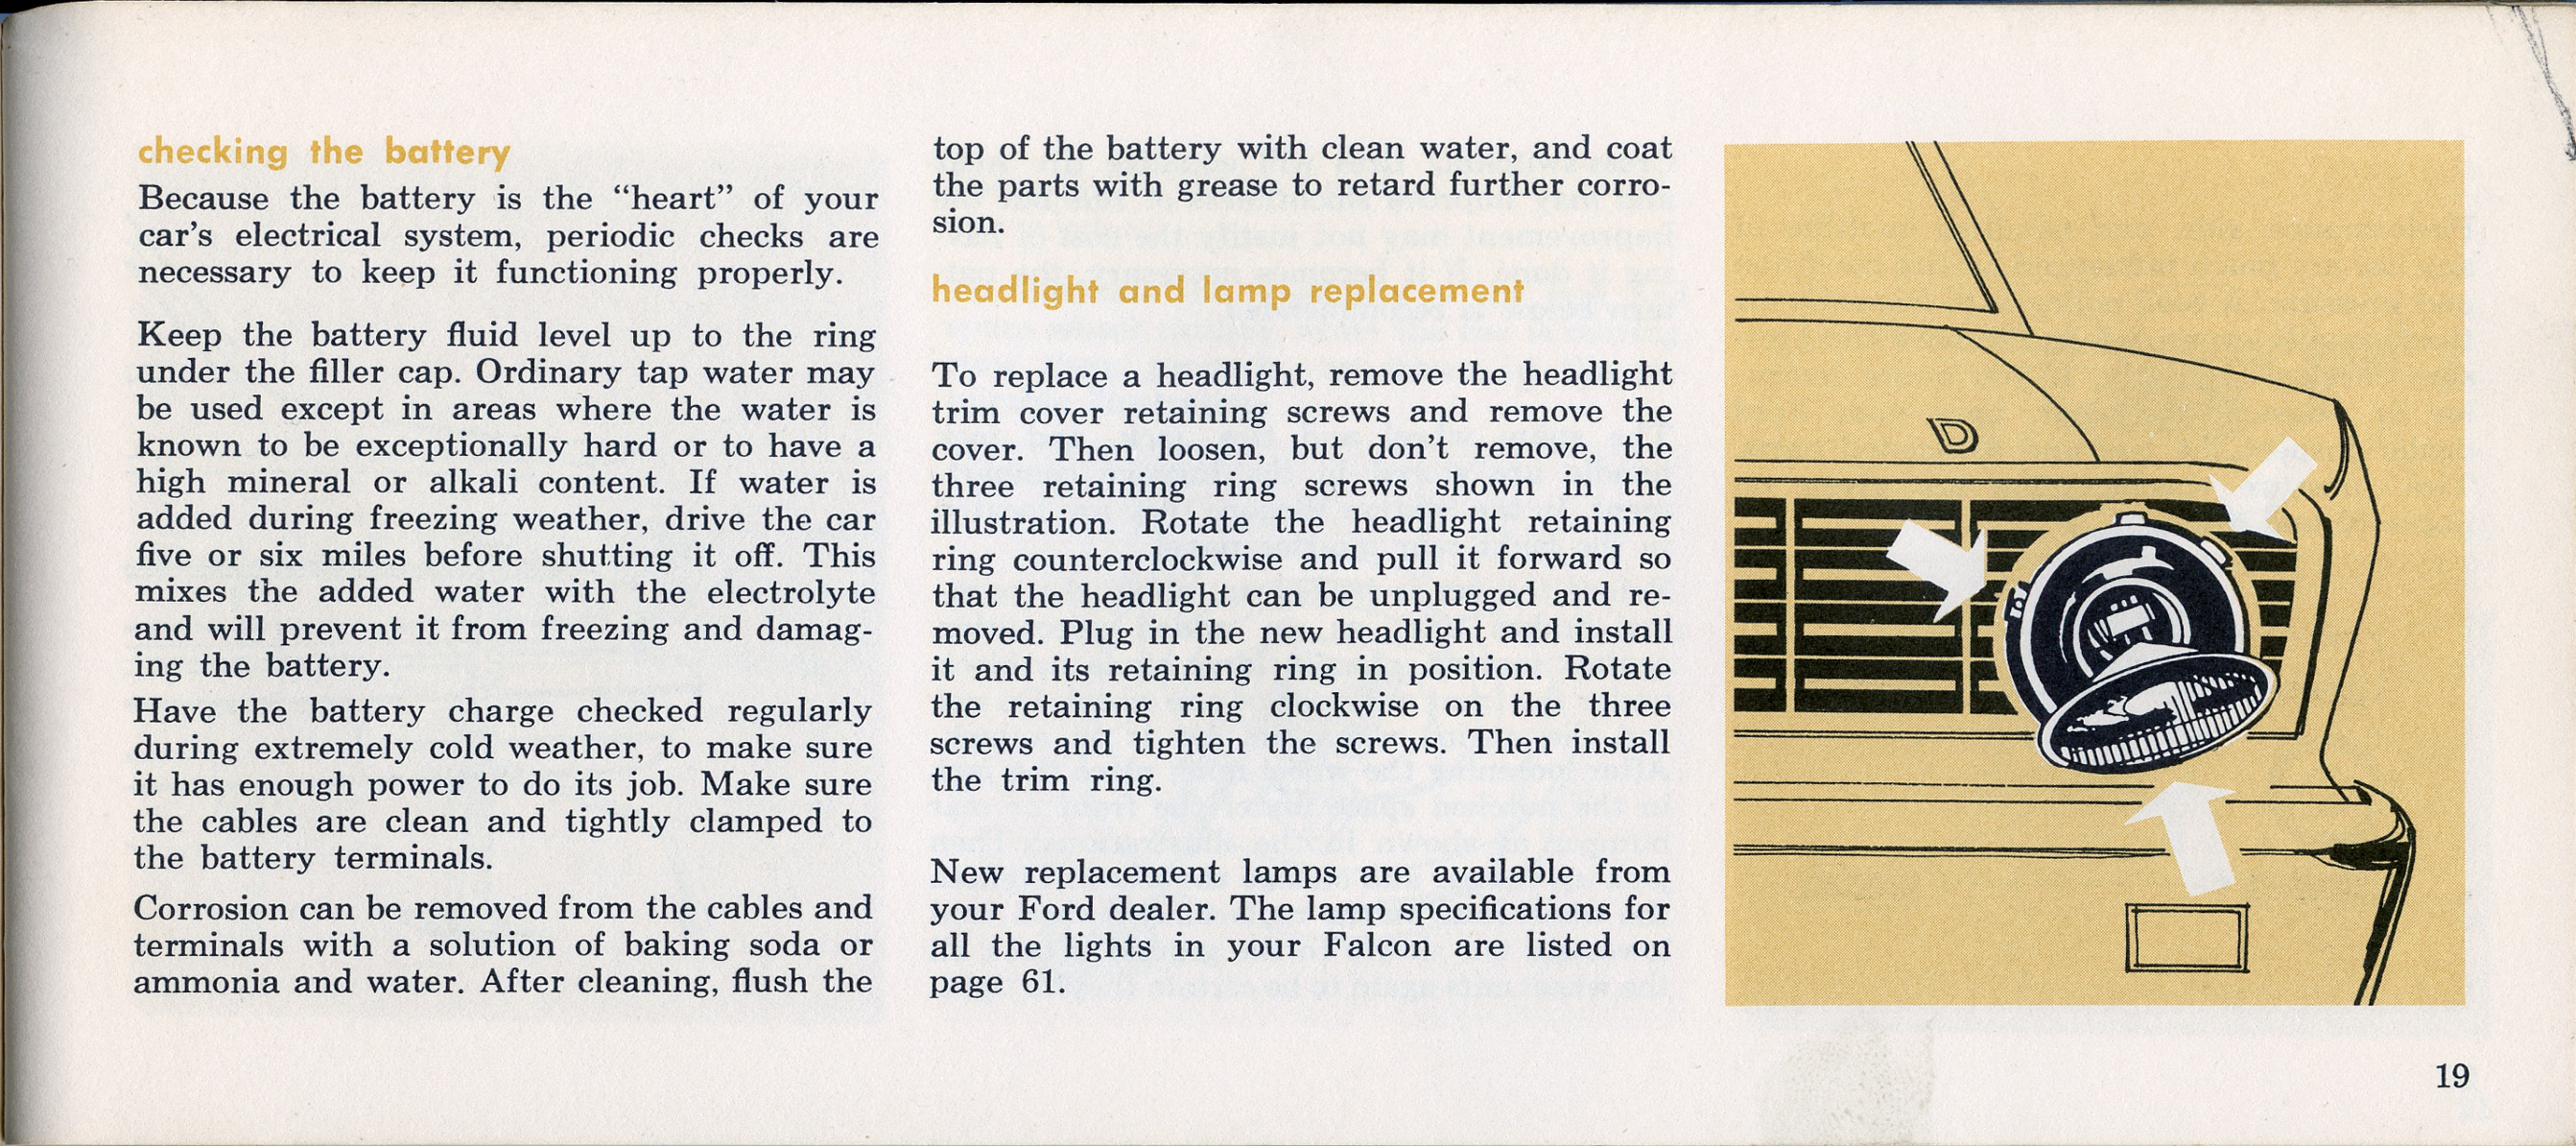 1964 Ford Falcon Owners Manual Page 72